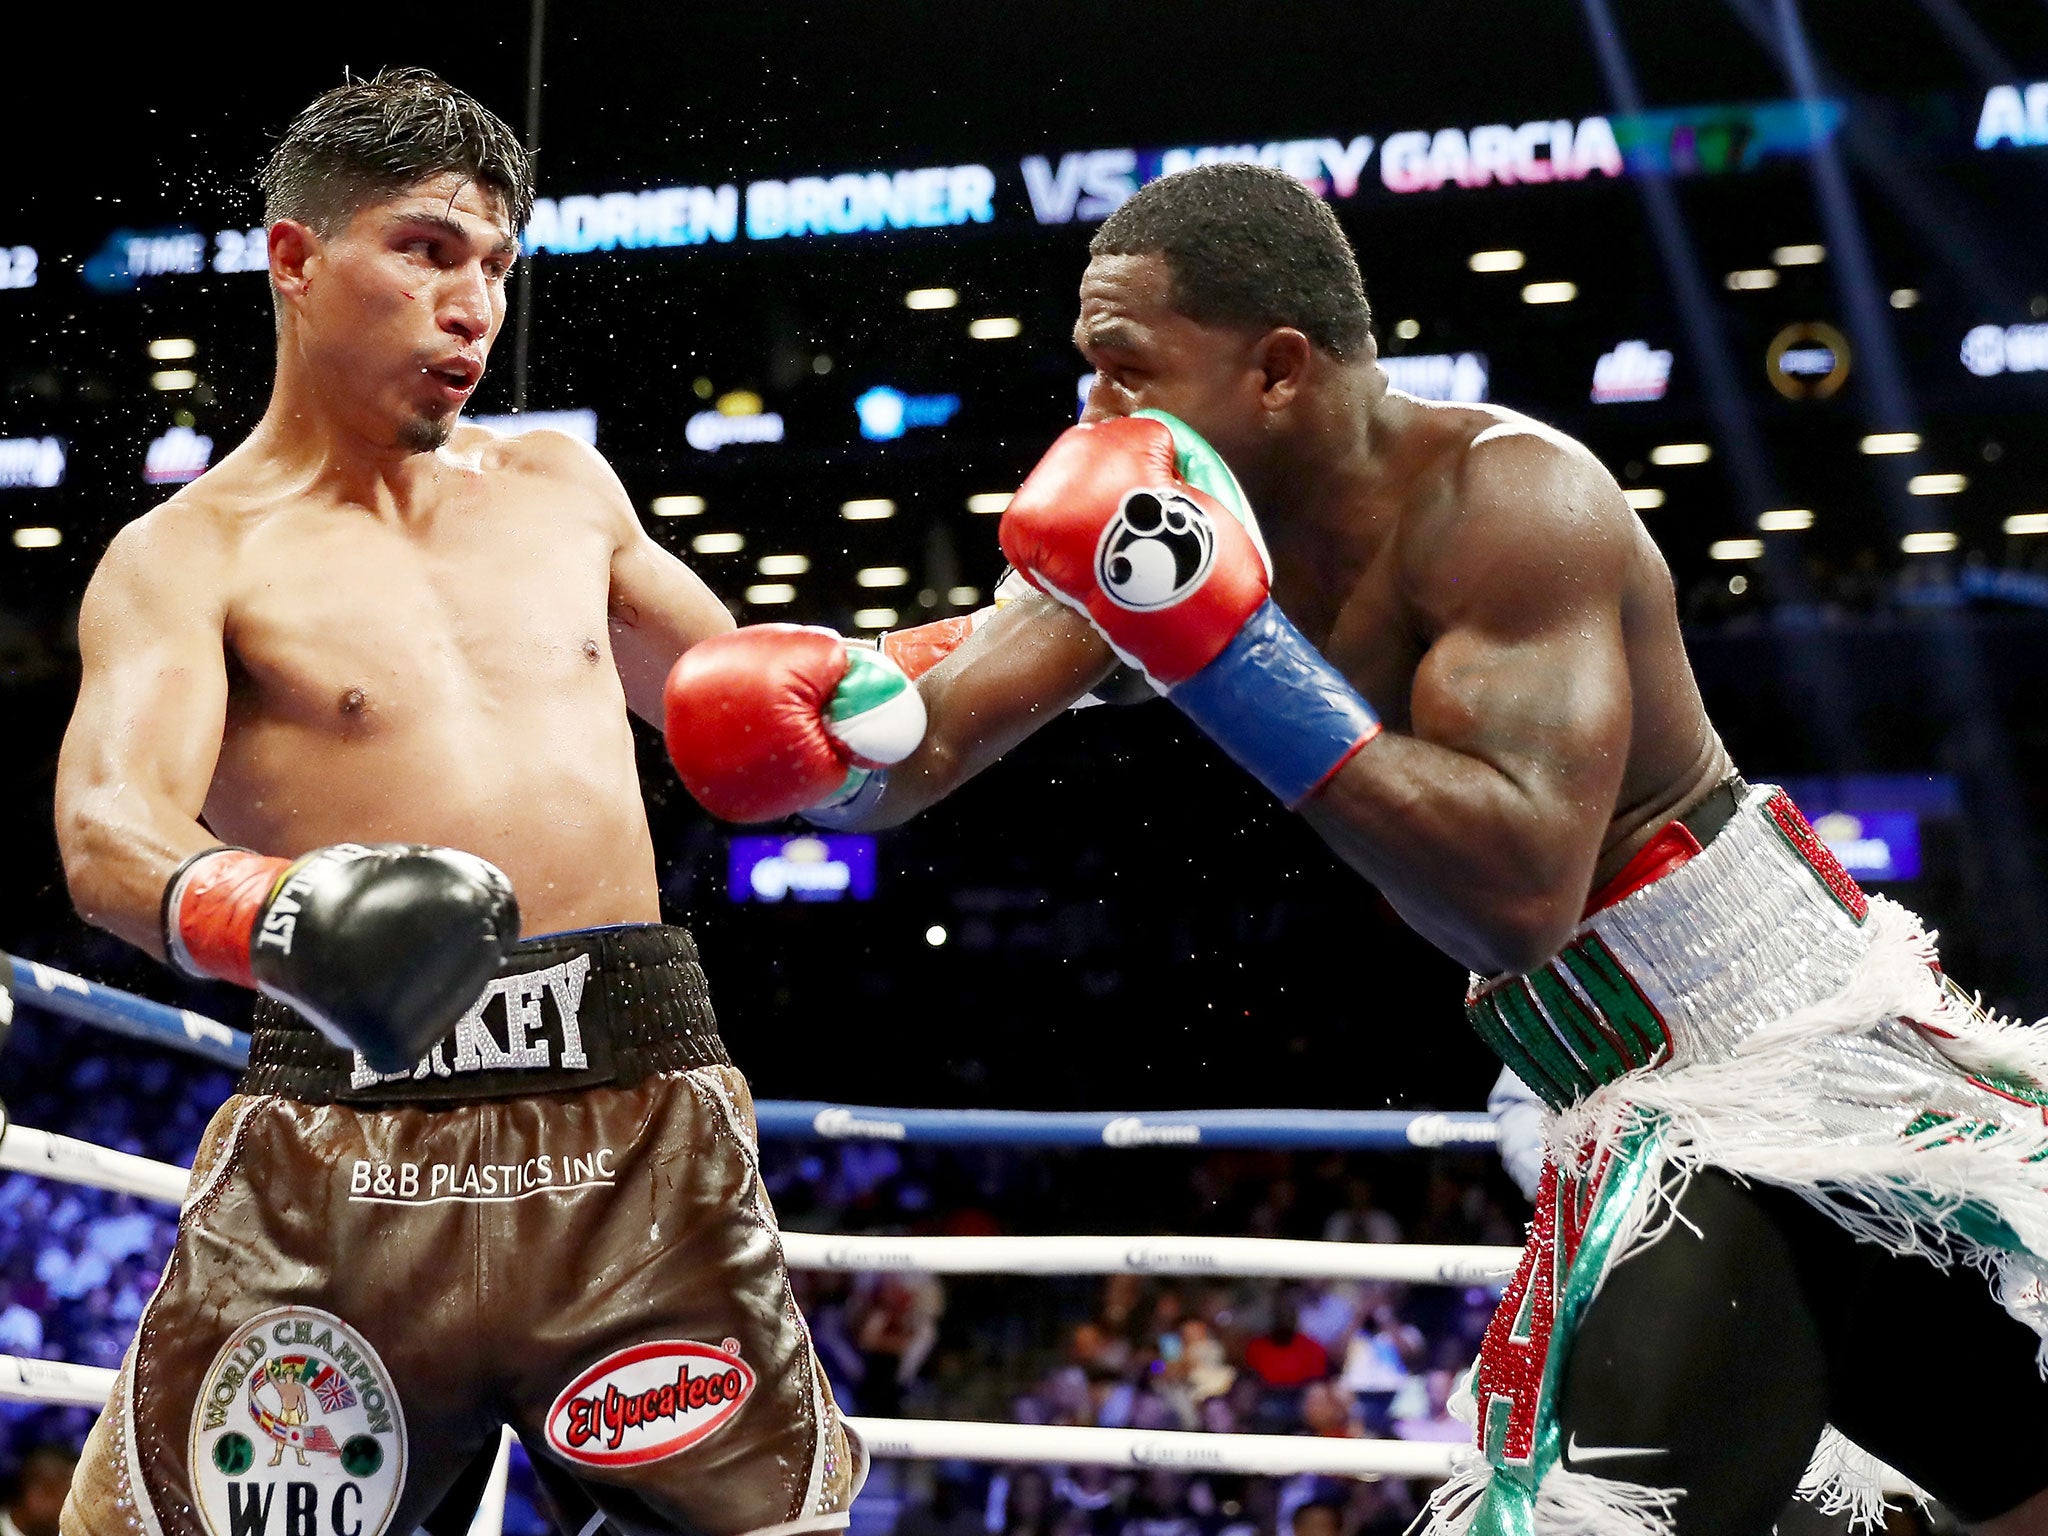 Garcia was able to stay out of range of Broner's biggest punches